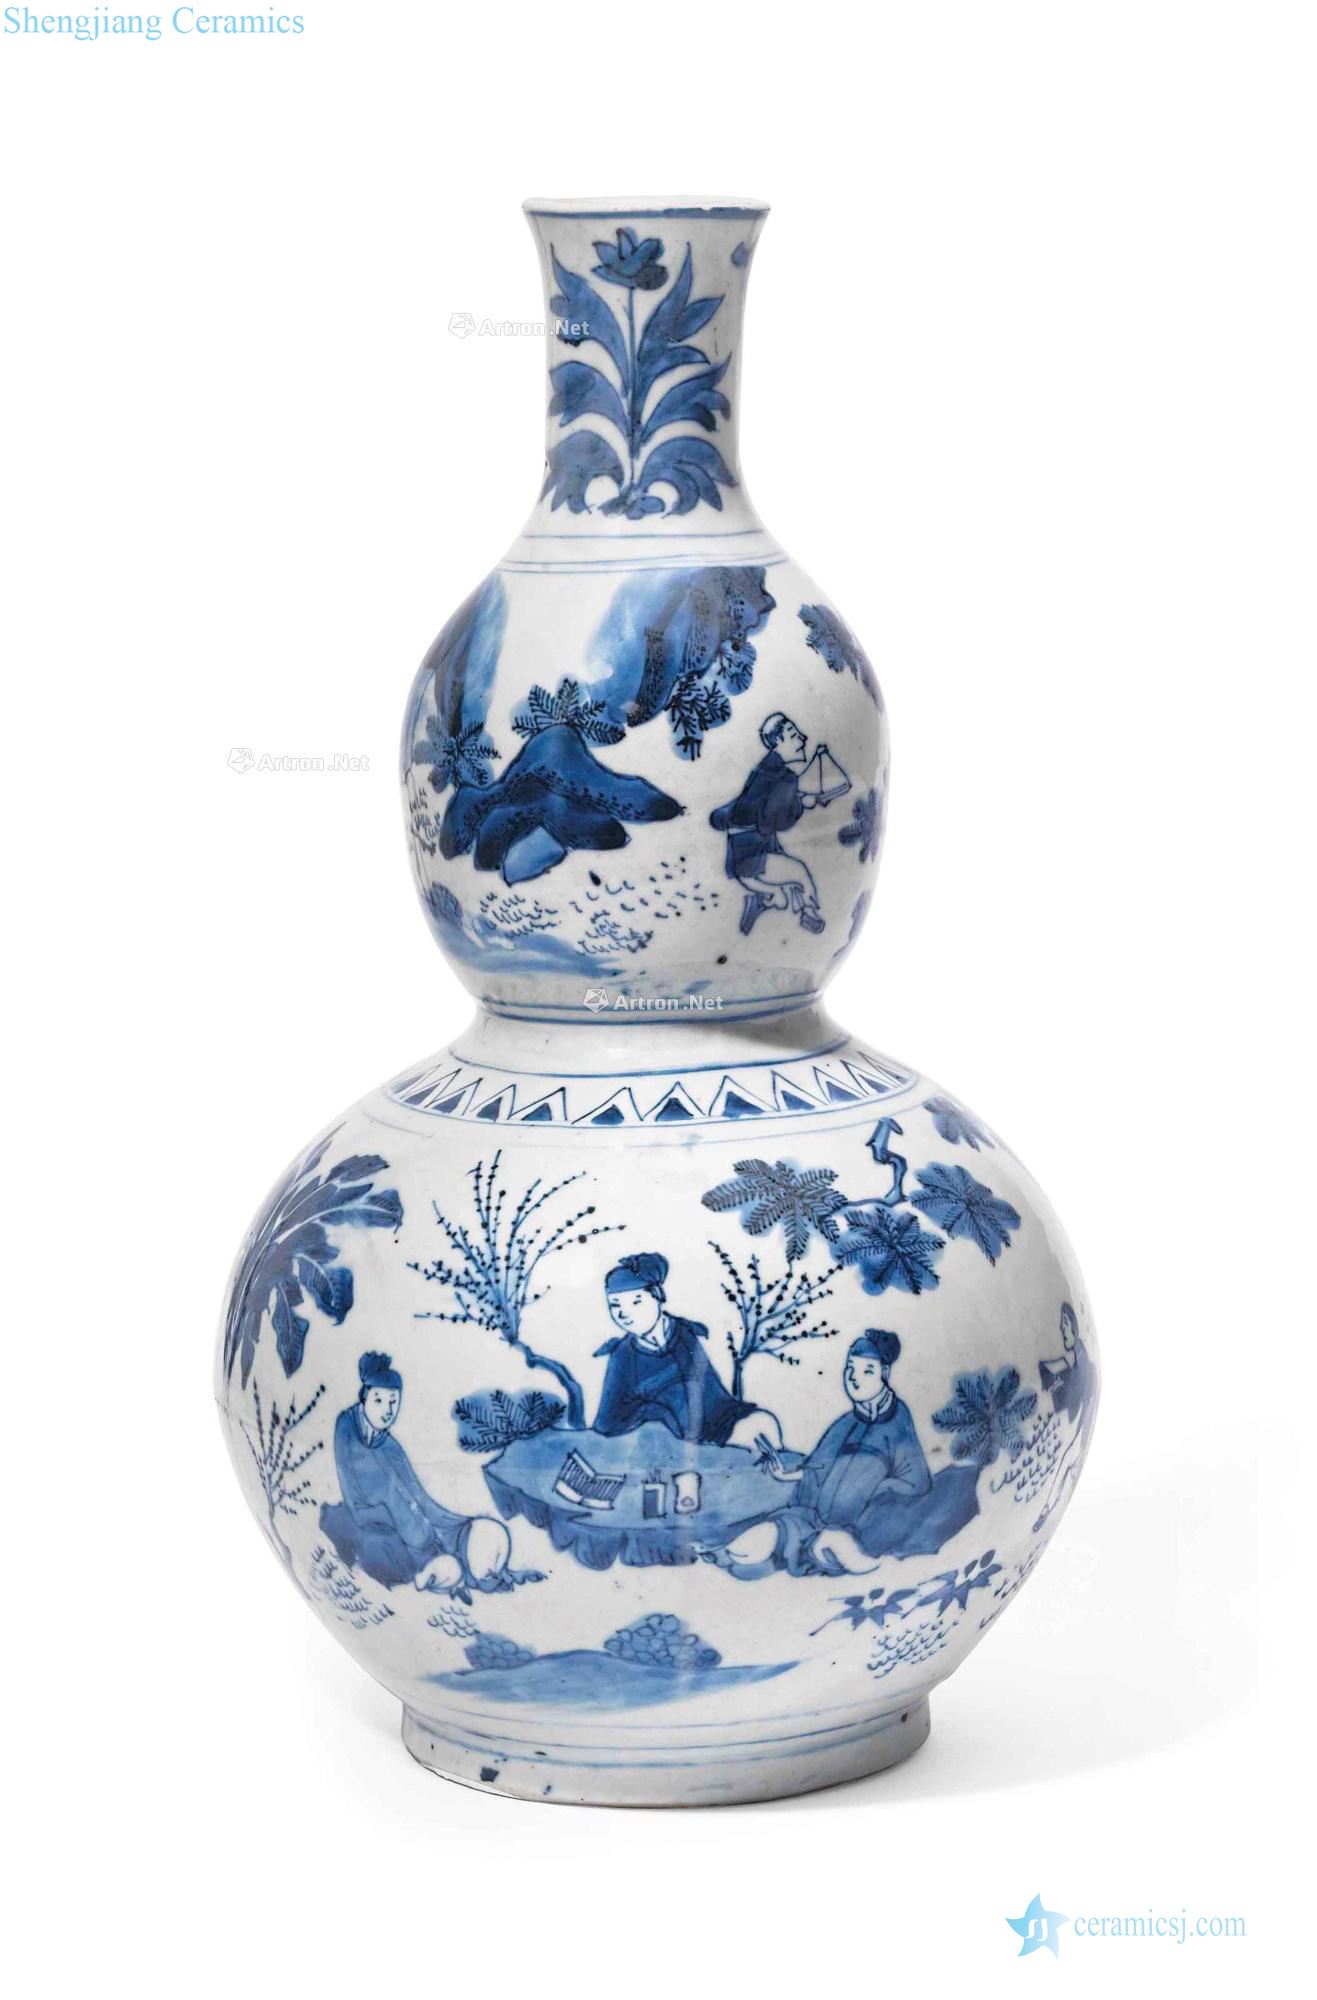 The late Ming dynasty Stories of blue and white gourd bottle